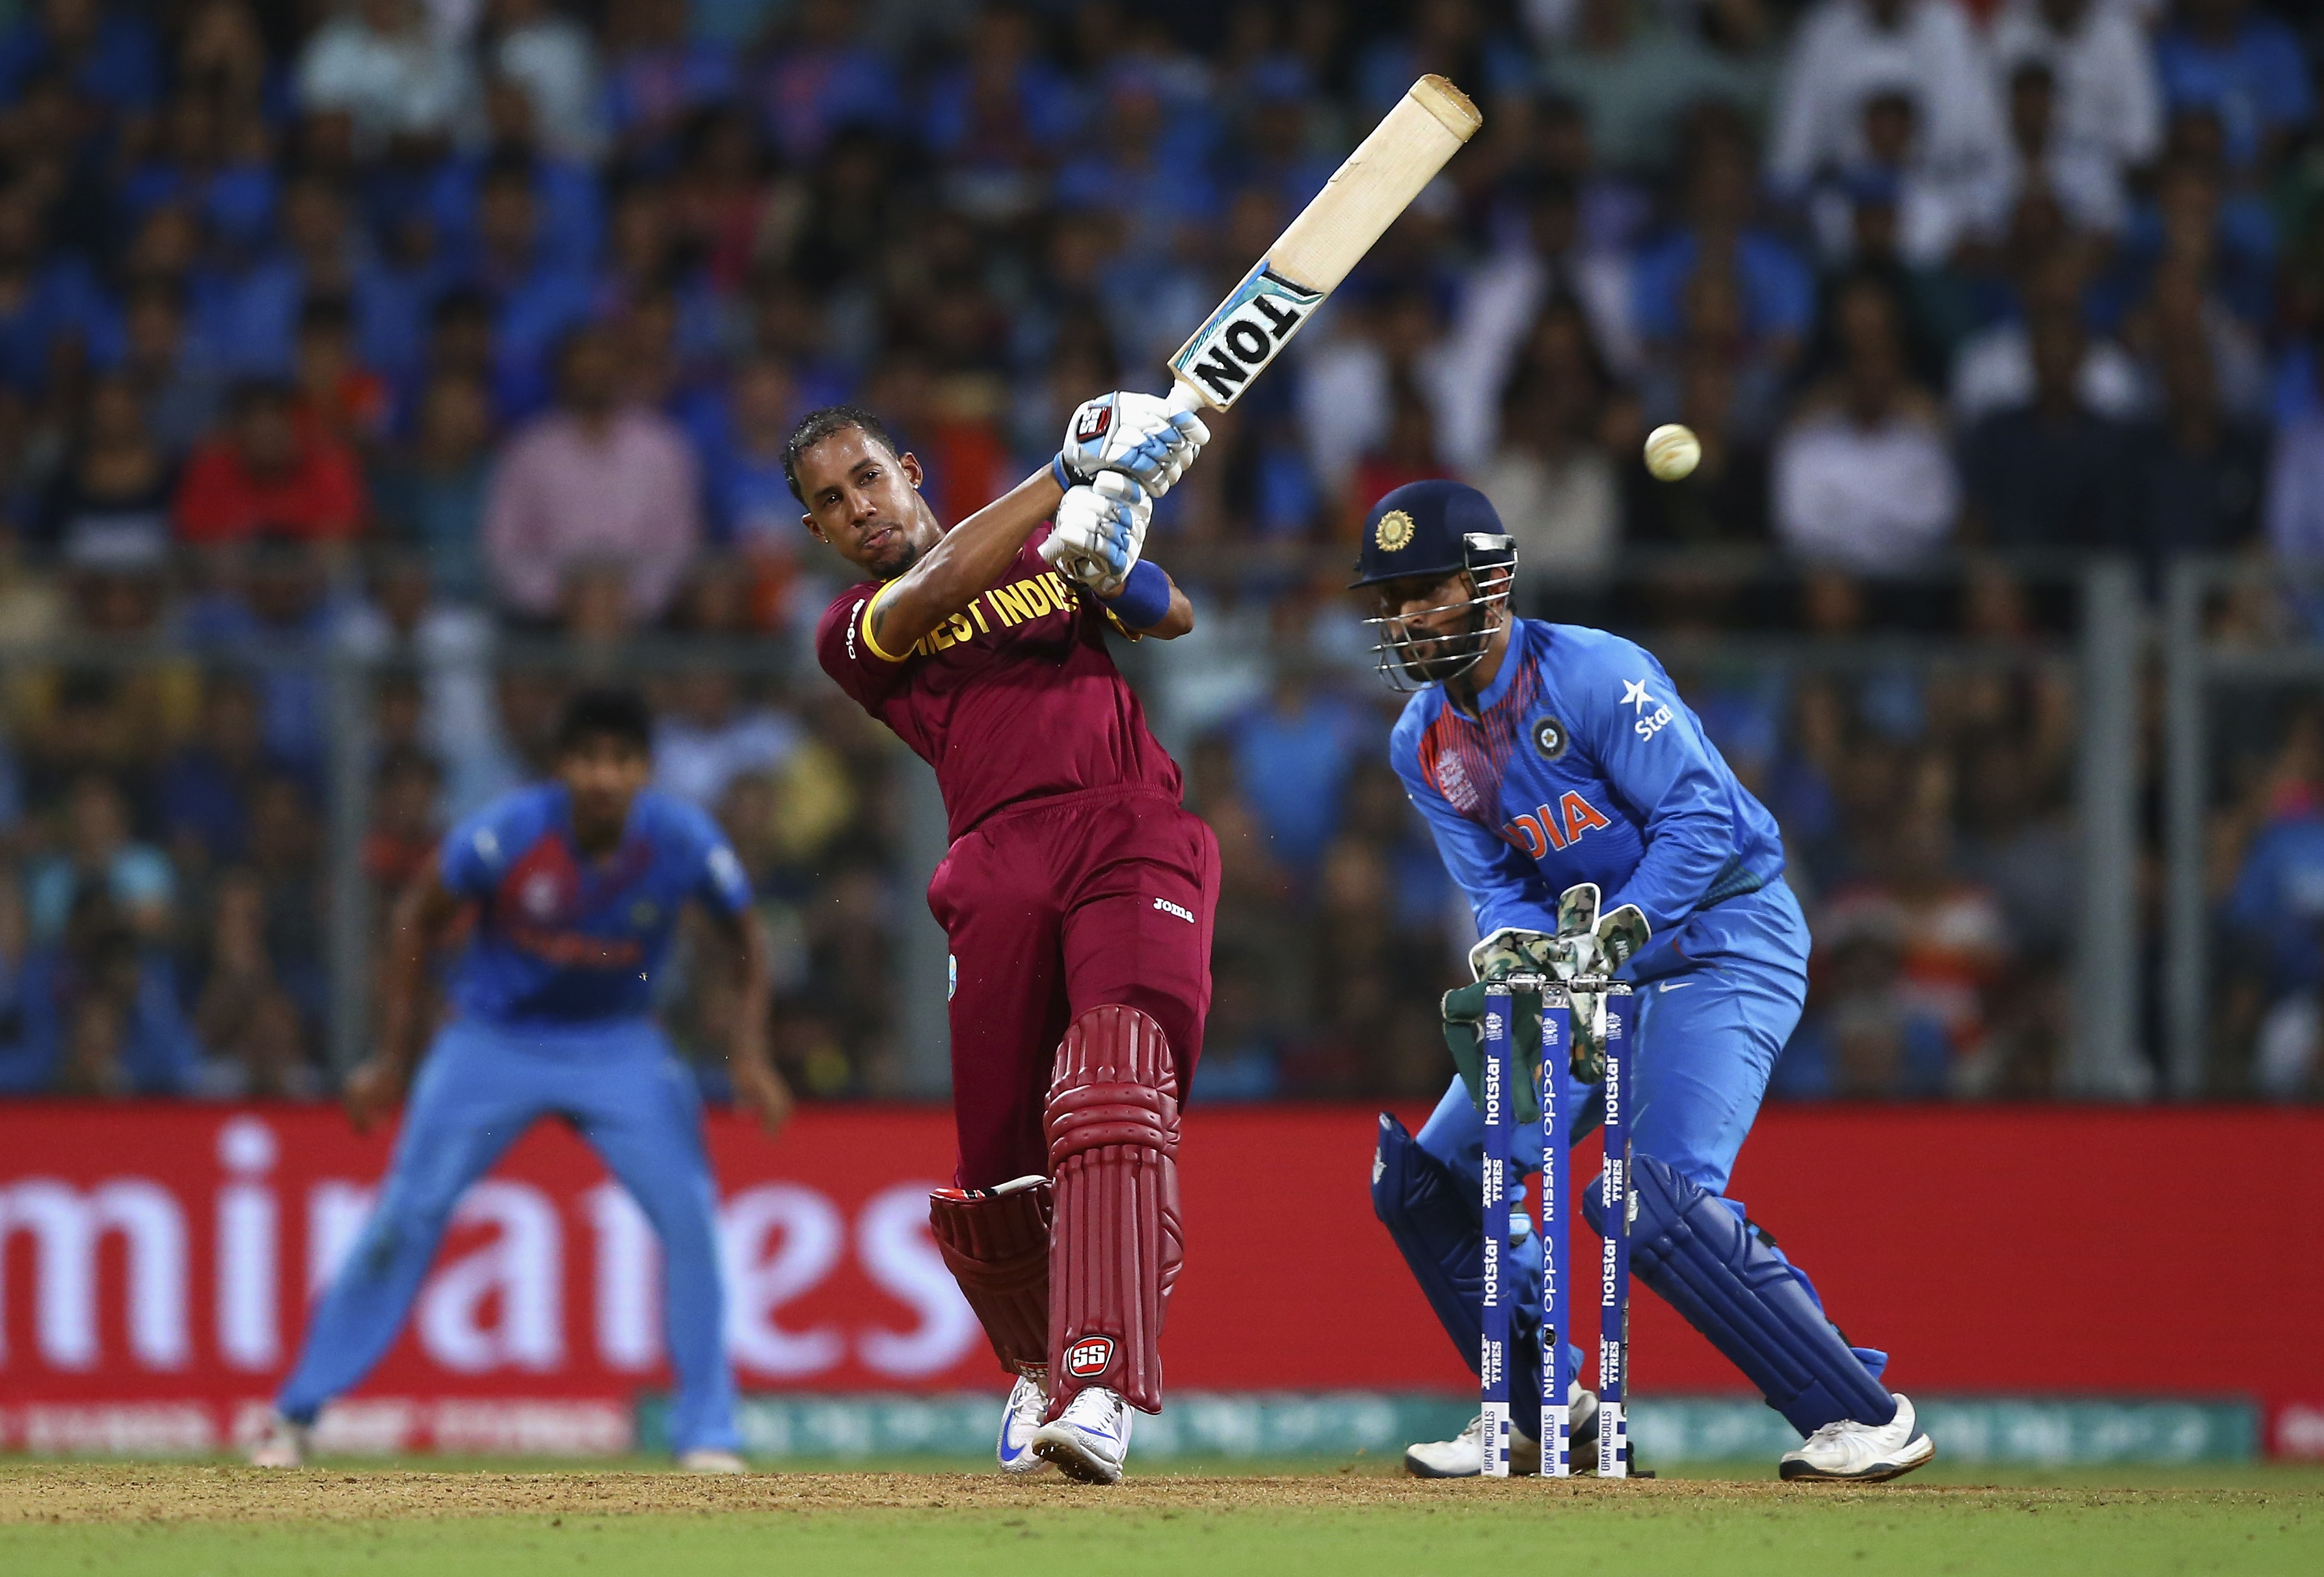 West Indies vs India 1st T20 Preview | MS Dhoni and co seek revenge against World T20 champs